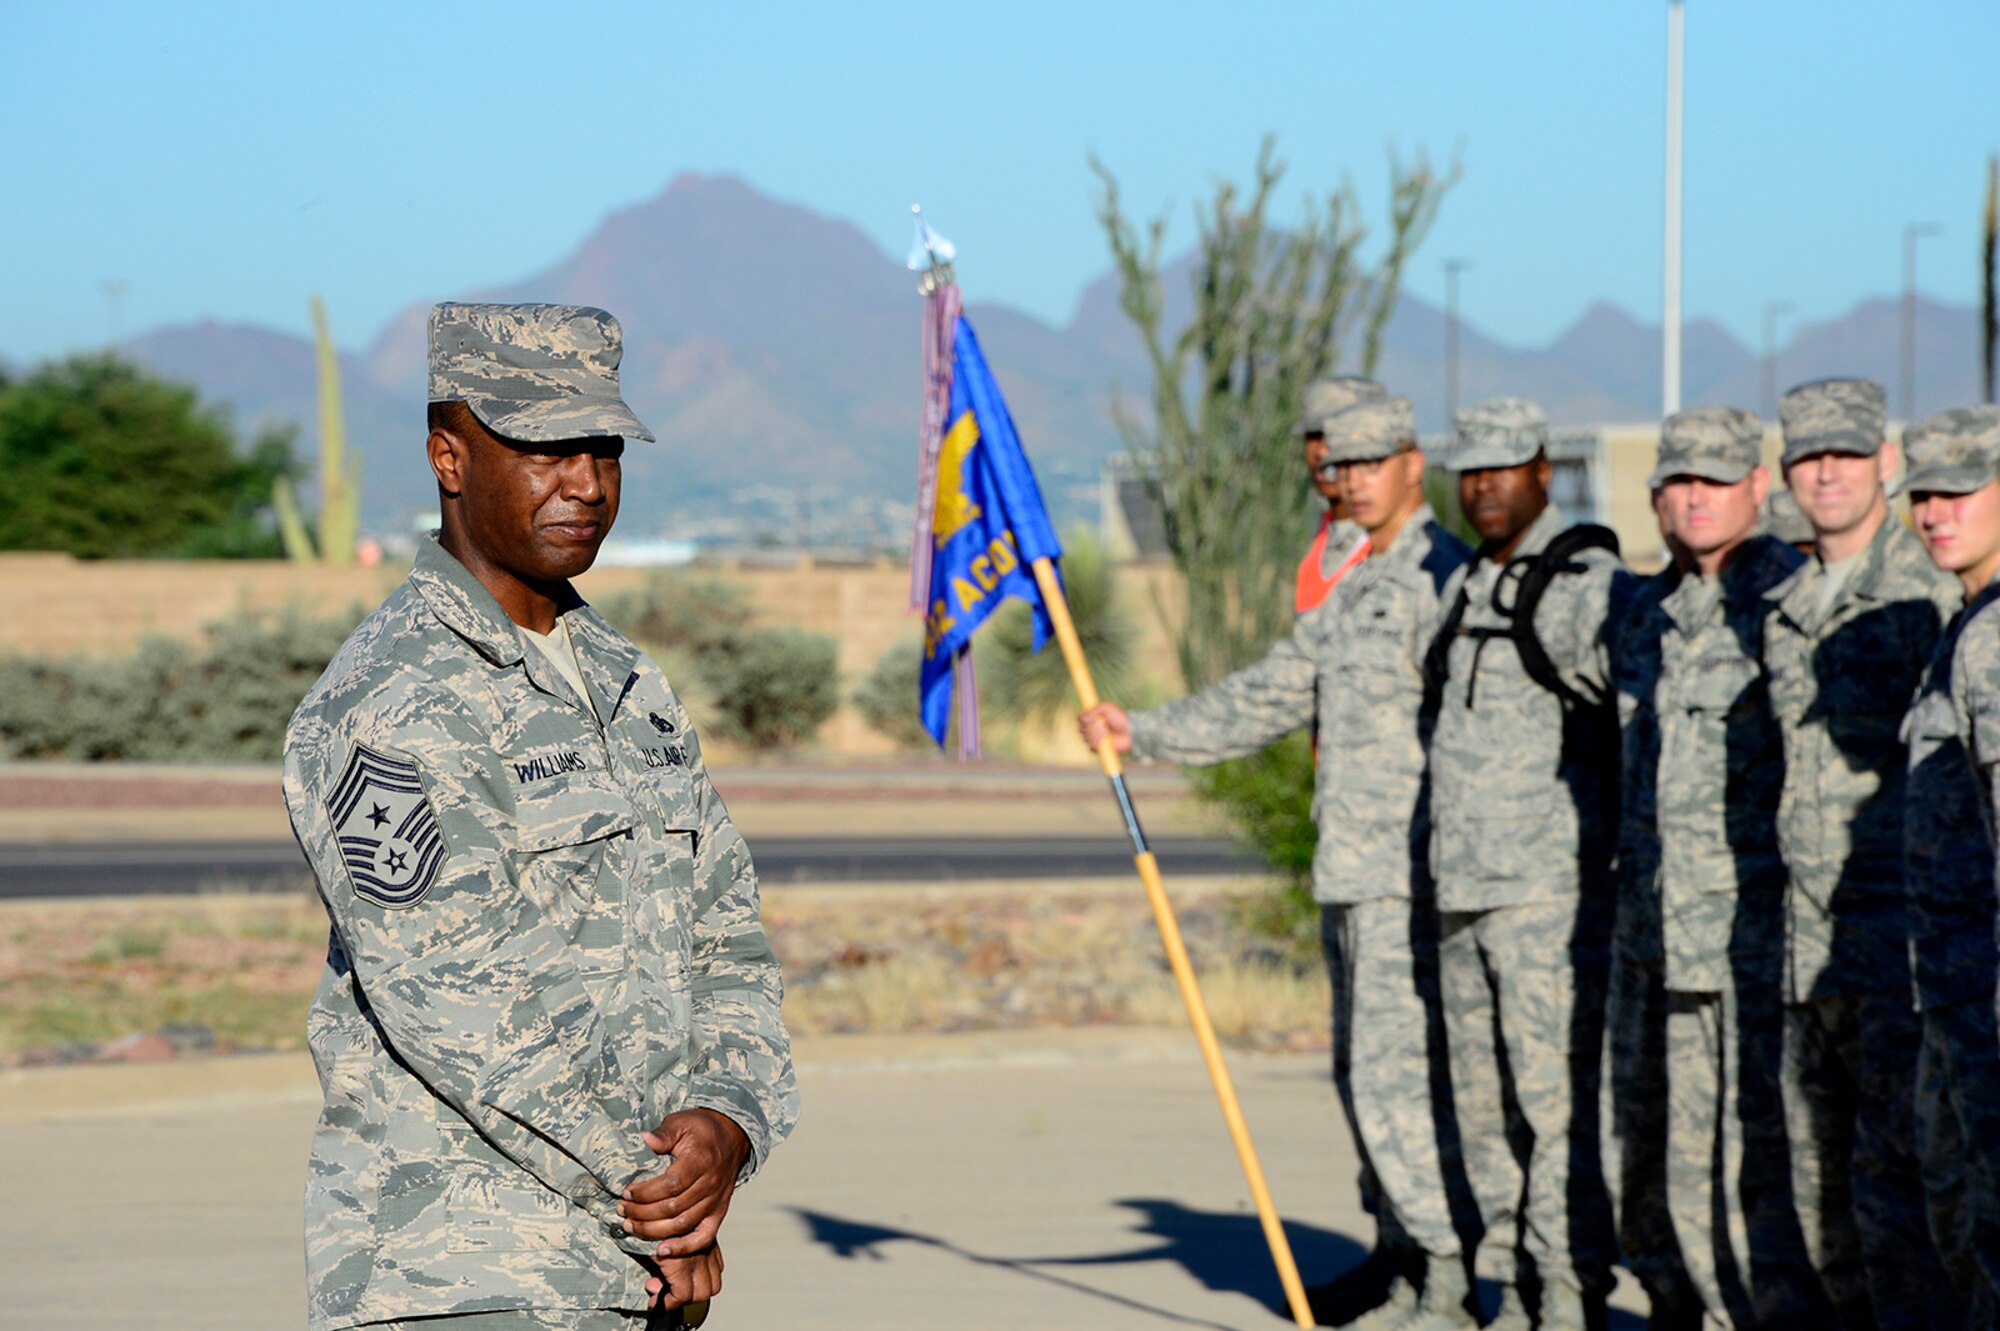 Chief Master Sgt. Calvin Williams, 12th Air Forces Southern (Command Chief), speaks with members of the 612th Air Communications Squadron at the end of their march around Davis-Monthan AFB, Ariz., in remembrance of the 9/11 victims, Sept. 11, 2014. (USAF photo by Staff Sgt. Heather Redman/Released)